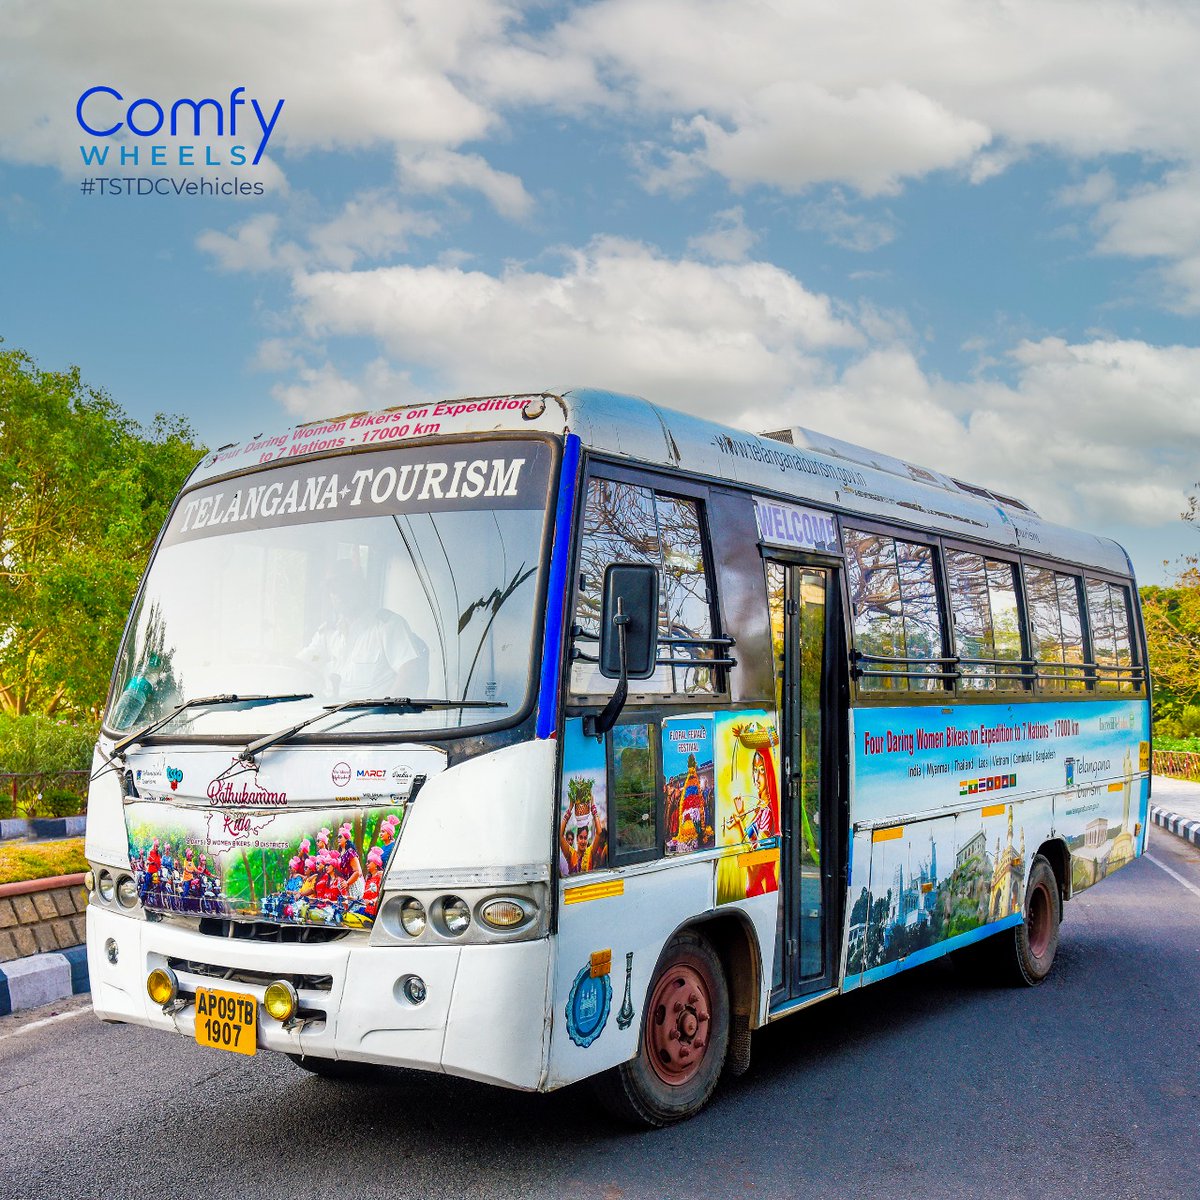 Comfortable rides make for memorable trips. Hire a ride of your choice for your next getaway. To know more about TSTDC vehicle hire, visit: bit.ly/3JDsJGp | 1800-425-46464 #ComfyWheels #TSTDCVehicles #VehicleHire #TSTDC #TelanganaTourism #Telangana